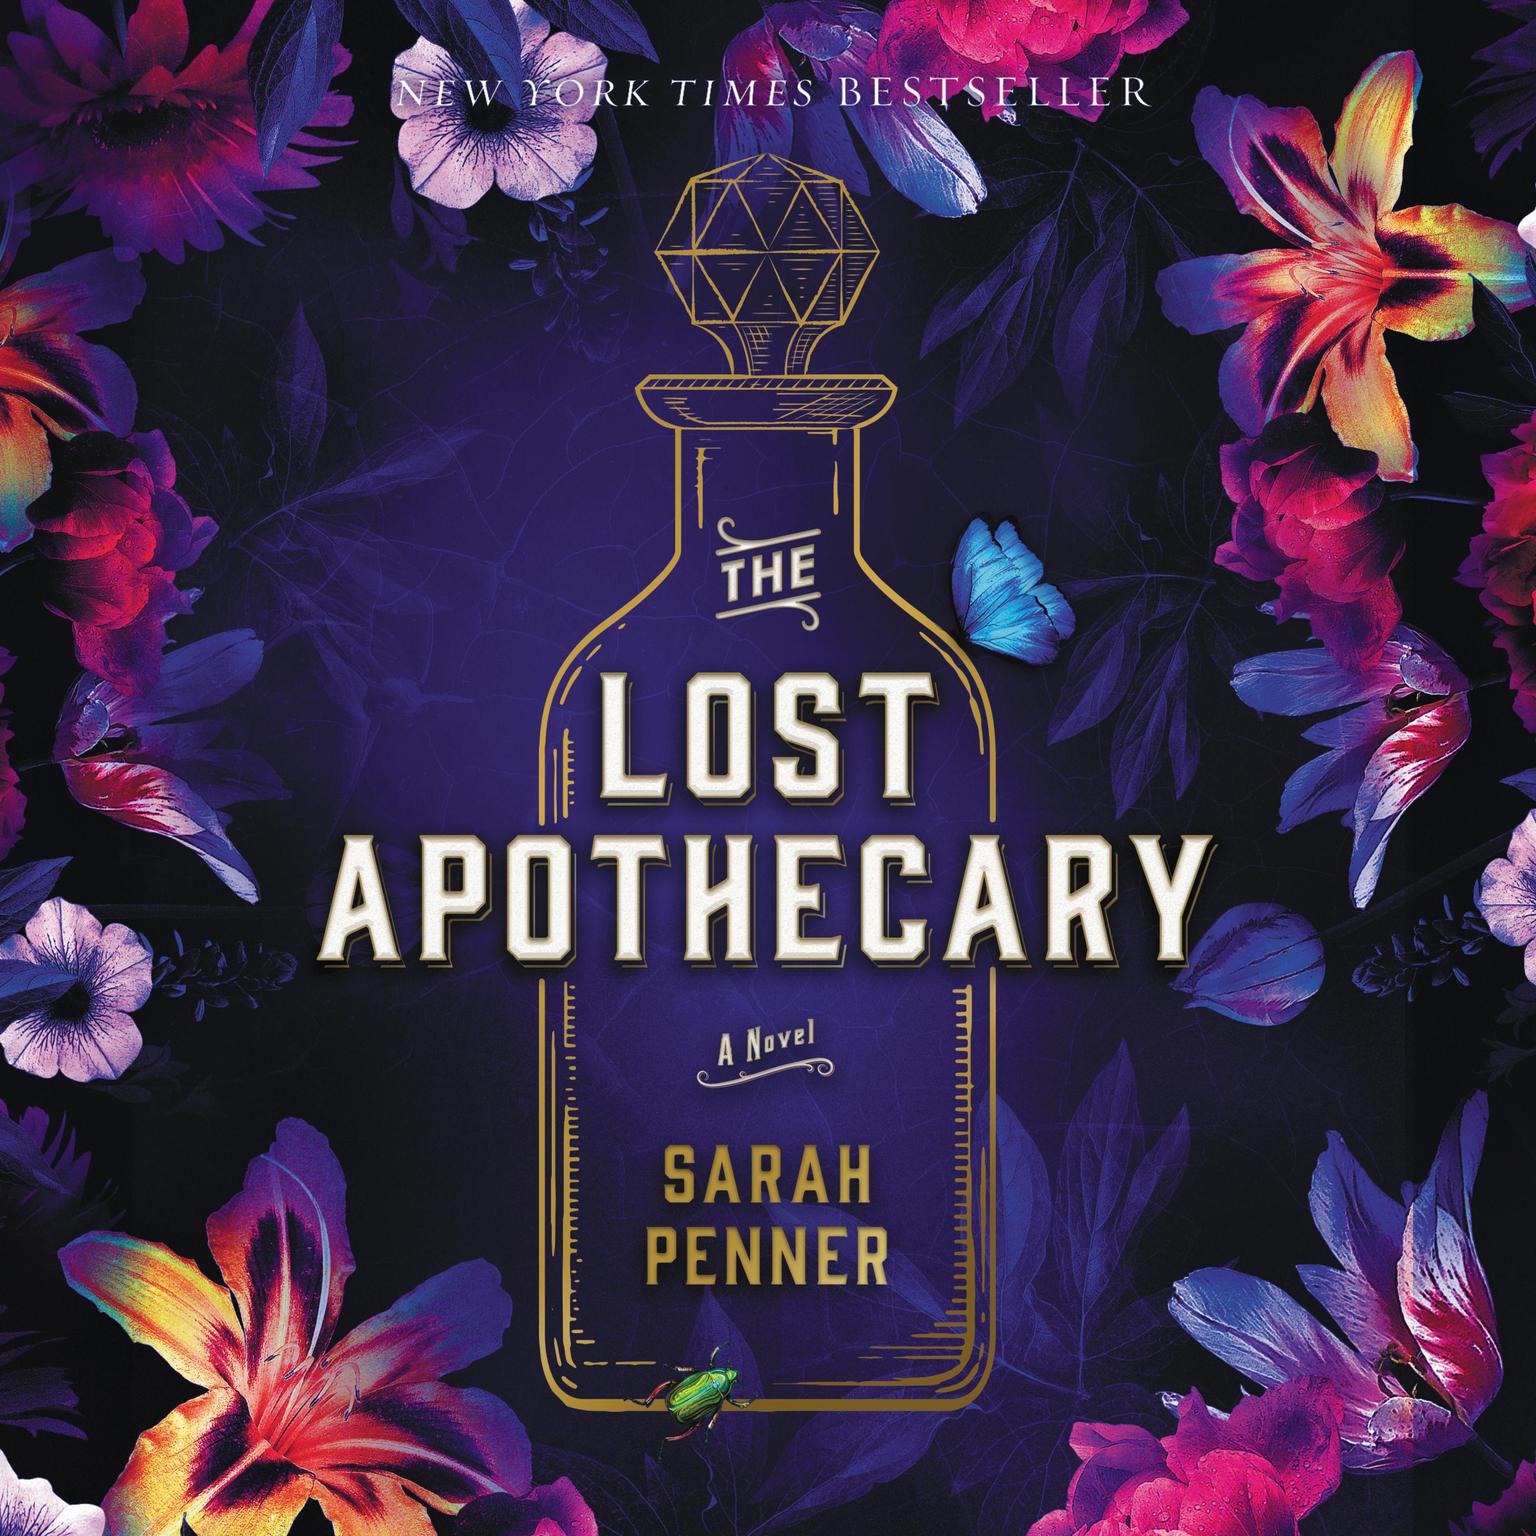 The Lost Apothecary: A Novel Audiobook, by Sarah Penner